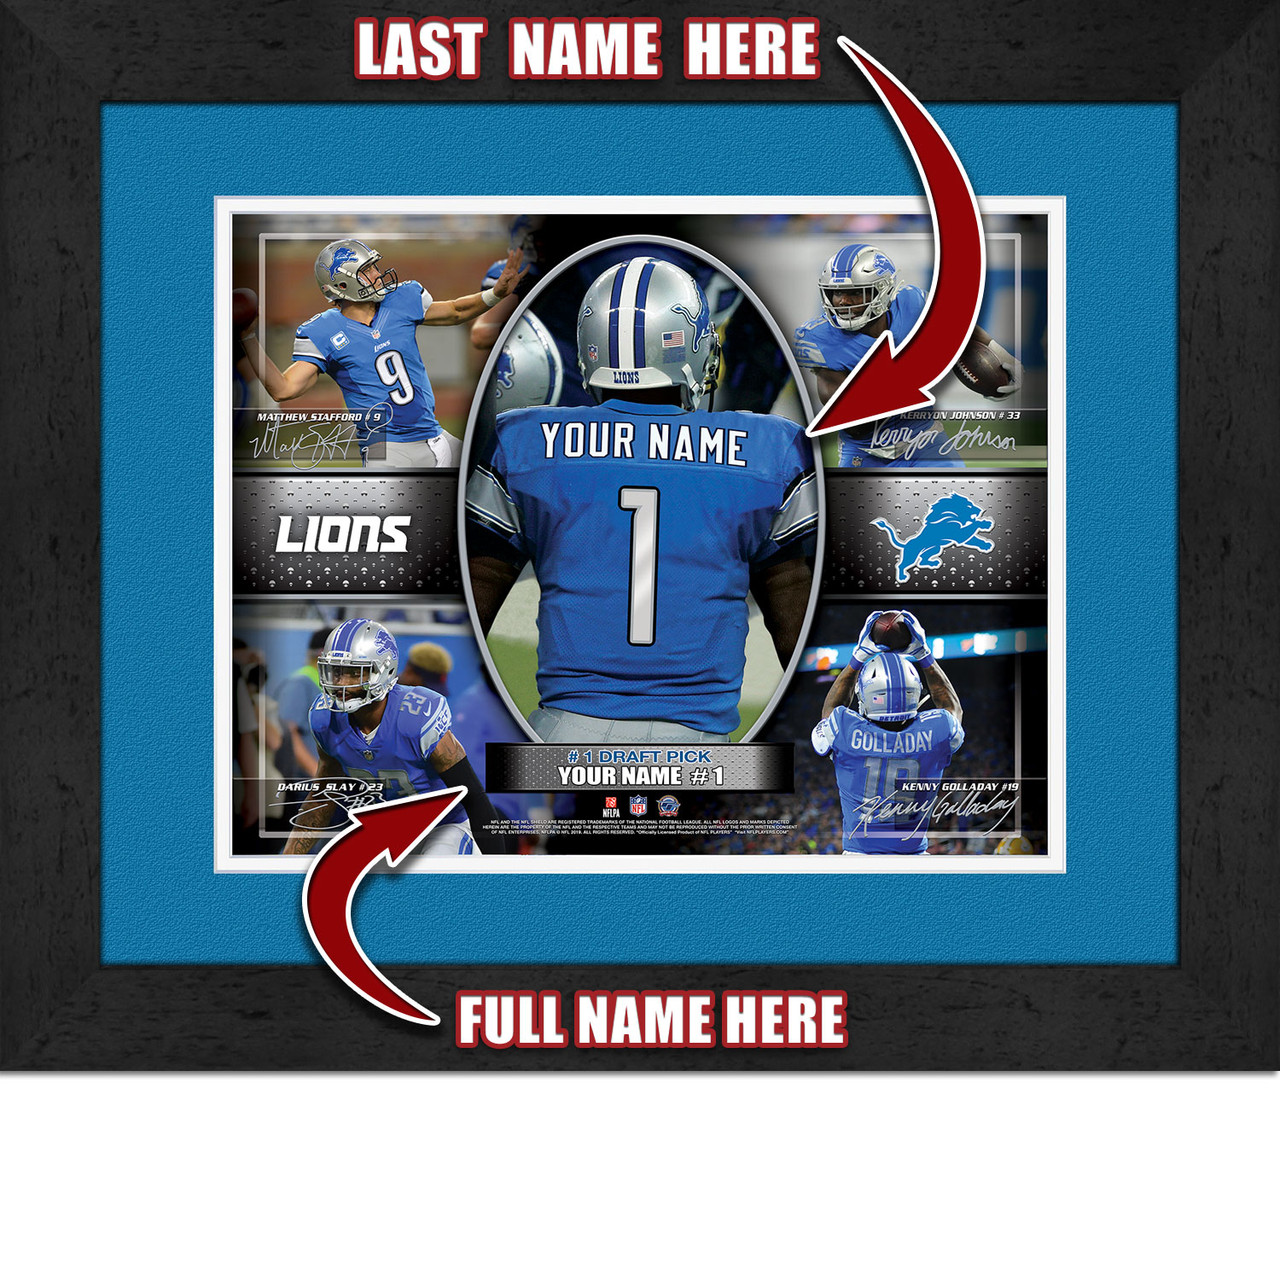 personalized lions jersey